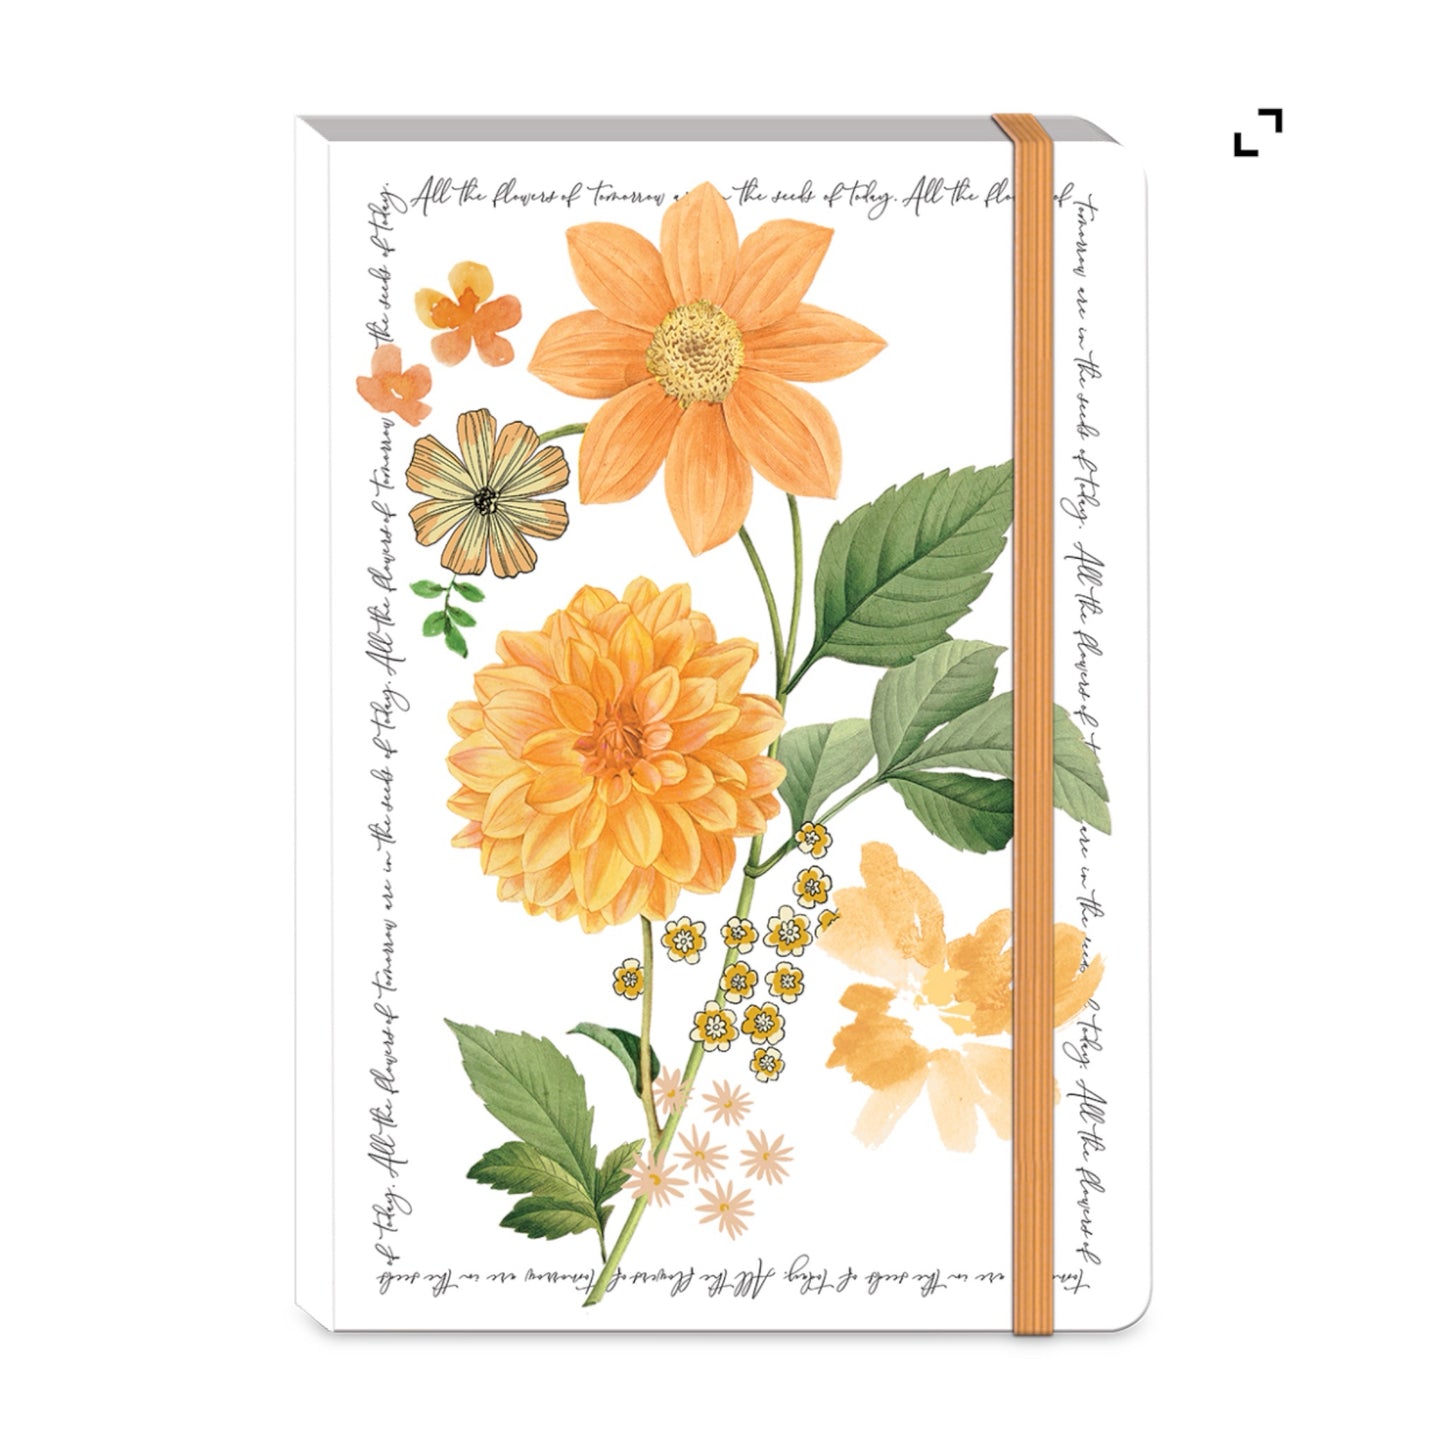 Marigold Softcover Journal